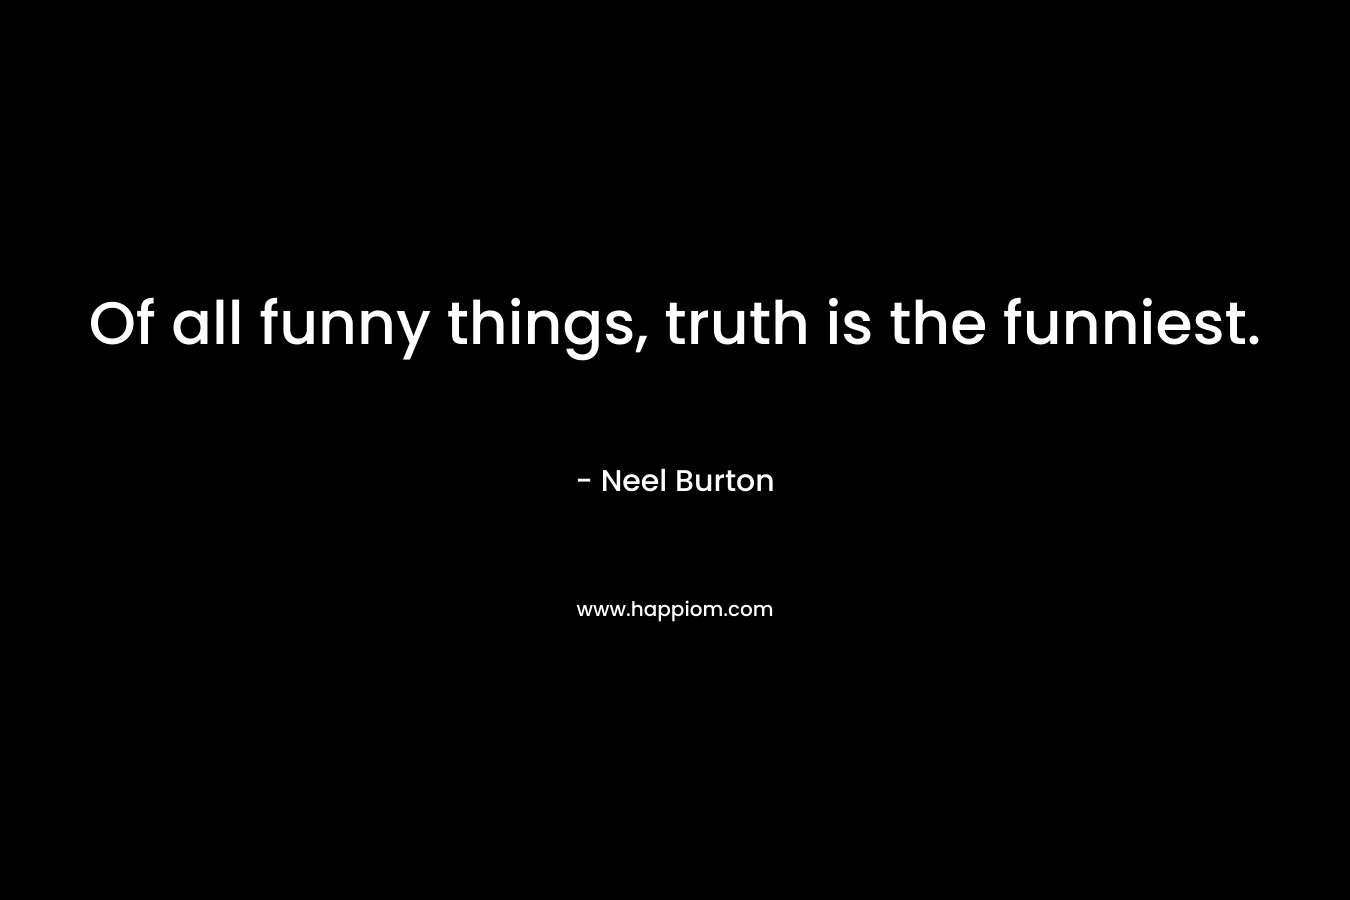 Of all funny things, truth is the funniest. – Neel Burton